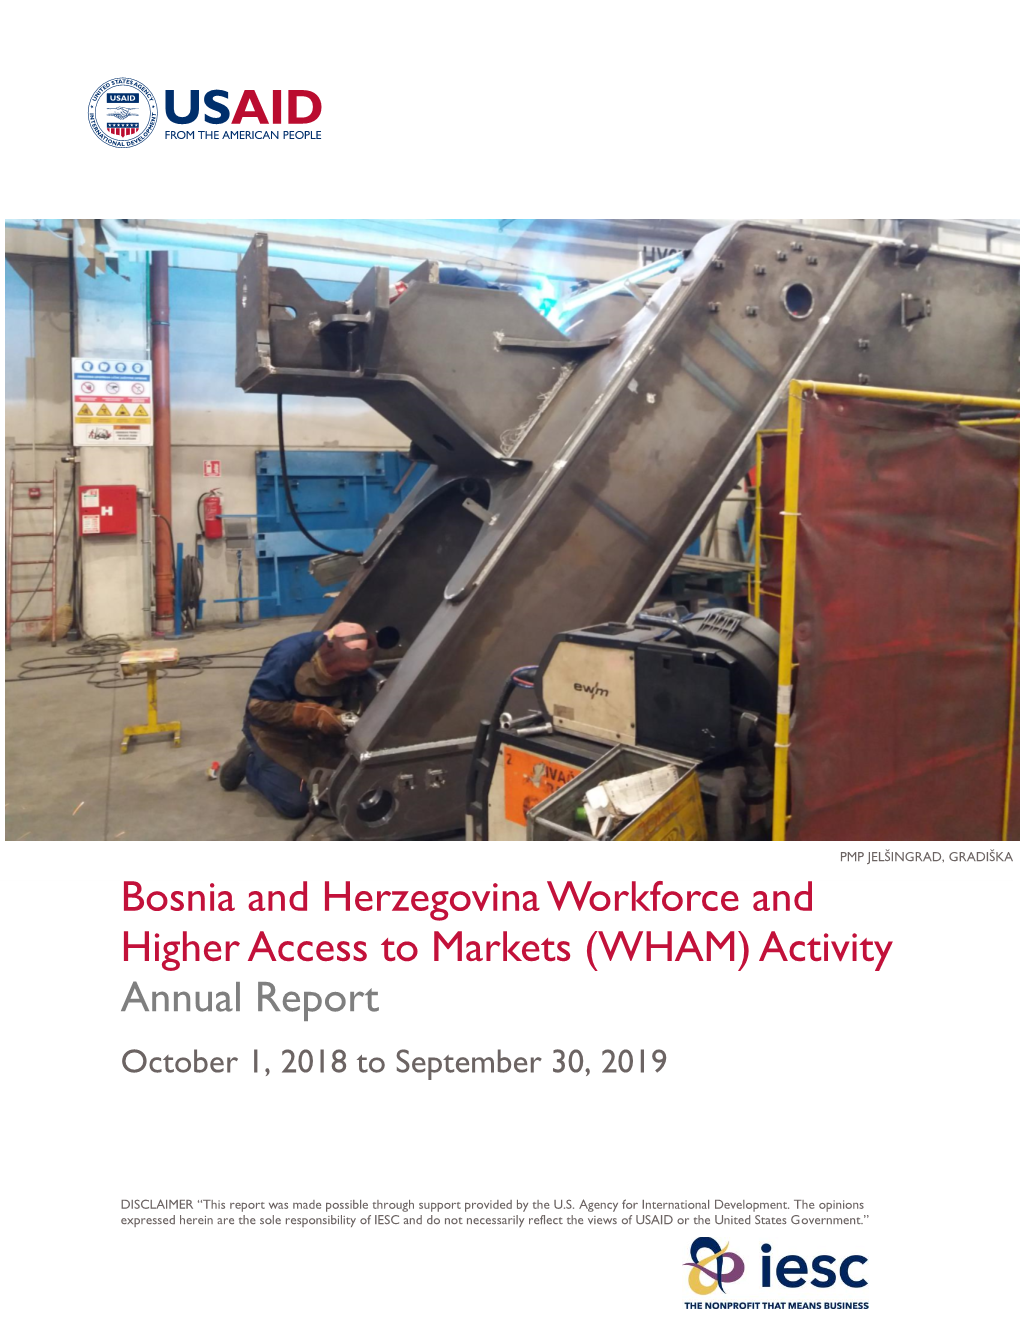 Bosnia and Herzegovina Workforce and Higher Access to Markets (WHAM) Activity